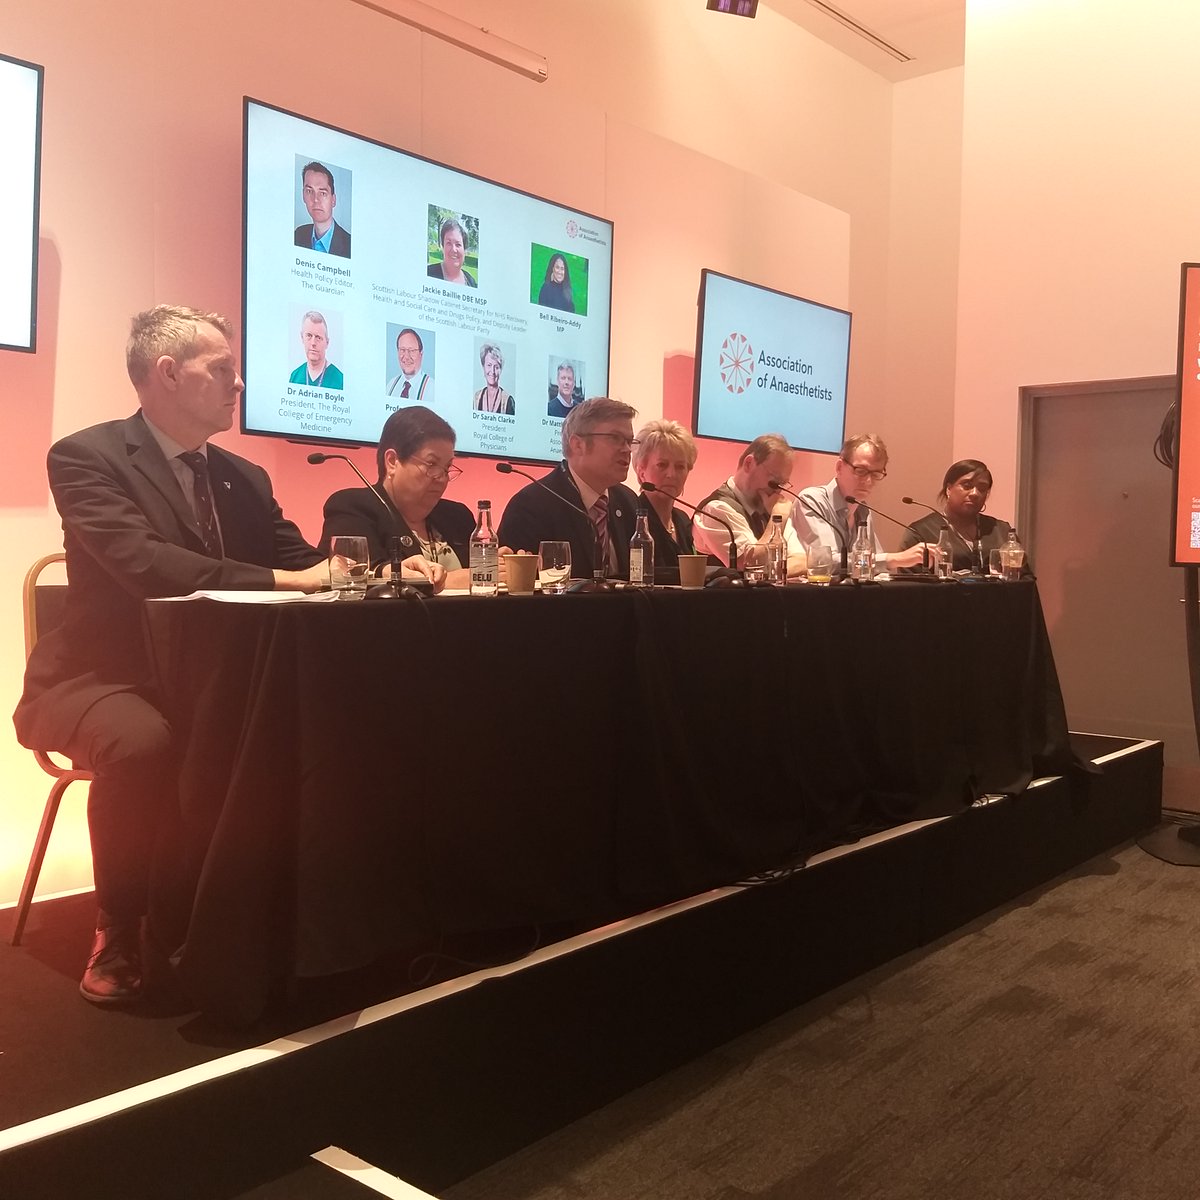 A huge thank-you to the panel at: “The #NHS #workforce of the future: what does it look like and how does it get there?” With @jackiebmsp, @BellRibeiroAddy MP, @daviesmtdavies, @RCEMPresident Dr Adrian Boyle, @drphilbanfield, @drsarahclarke, Chaired by @denis_campbell #Lab23